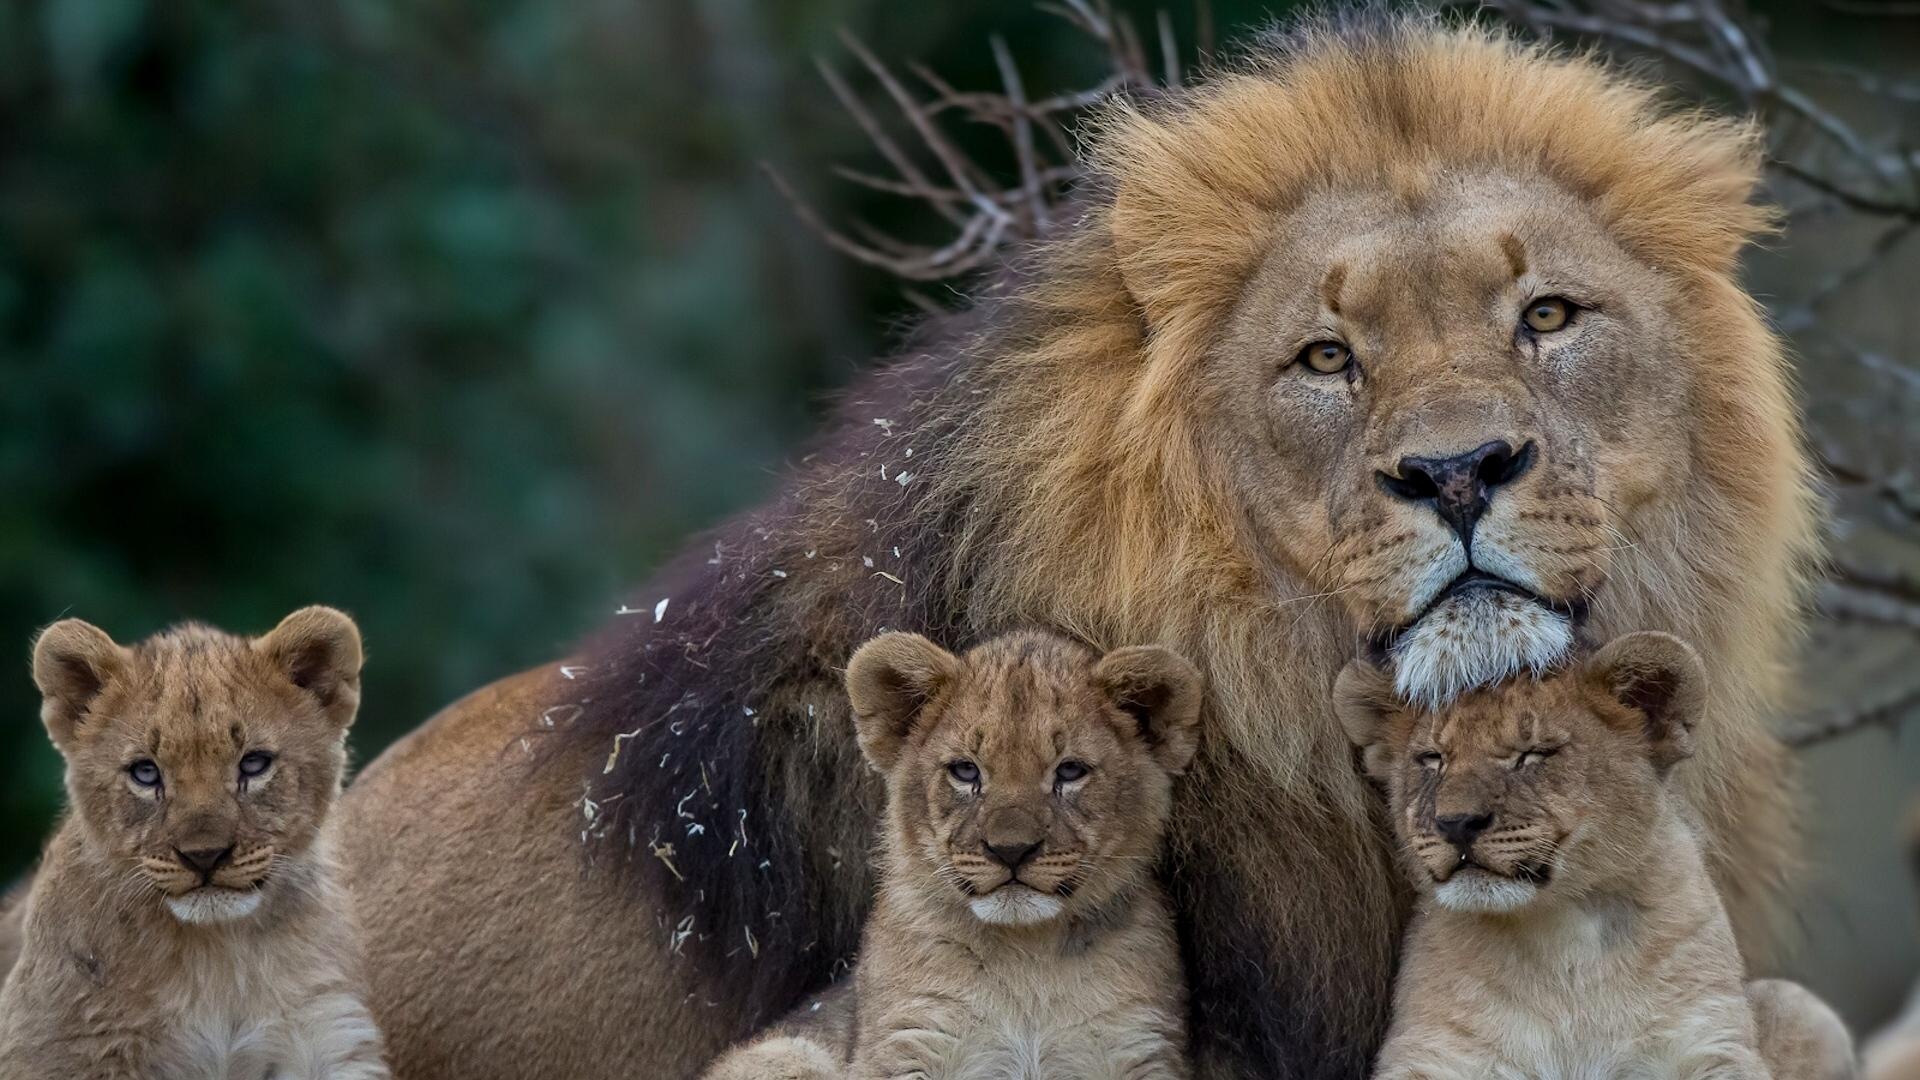 Download wallpaper 1920x1080 lion, lioness, young, family